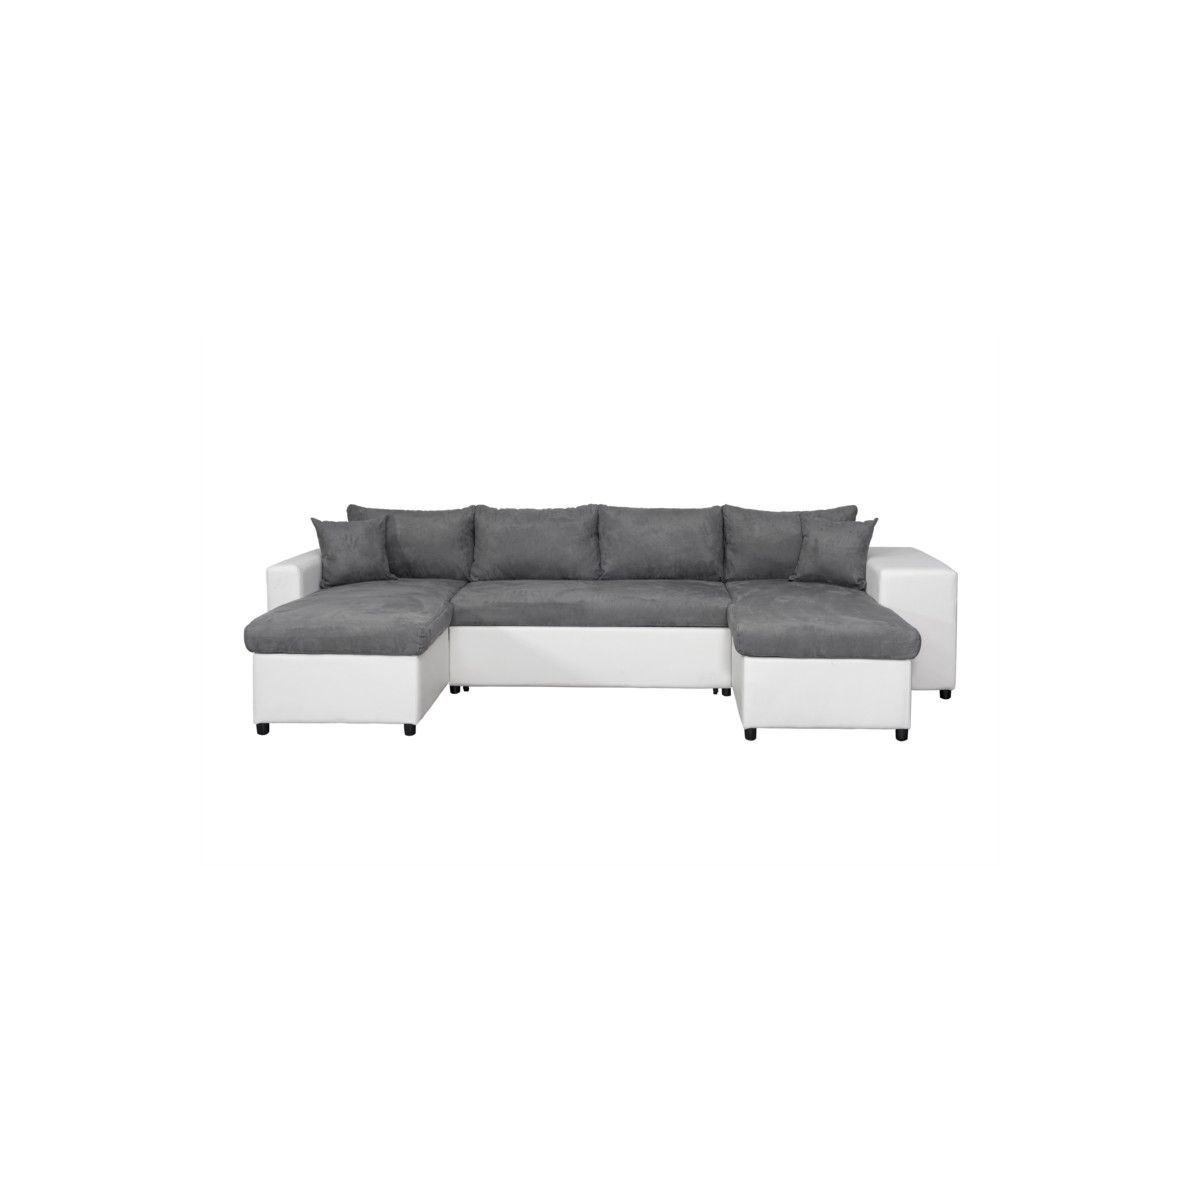 Sofa Bed 6 Places Fabric Pu Microfiber Niche On The Right Katia Grey, White Inside Microfiber Sectional Corner Sofas (Photo 14 of 15)